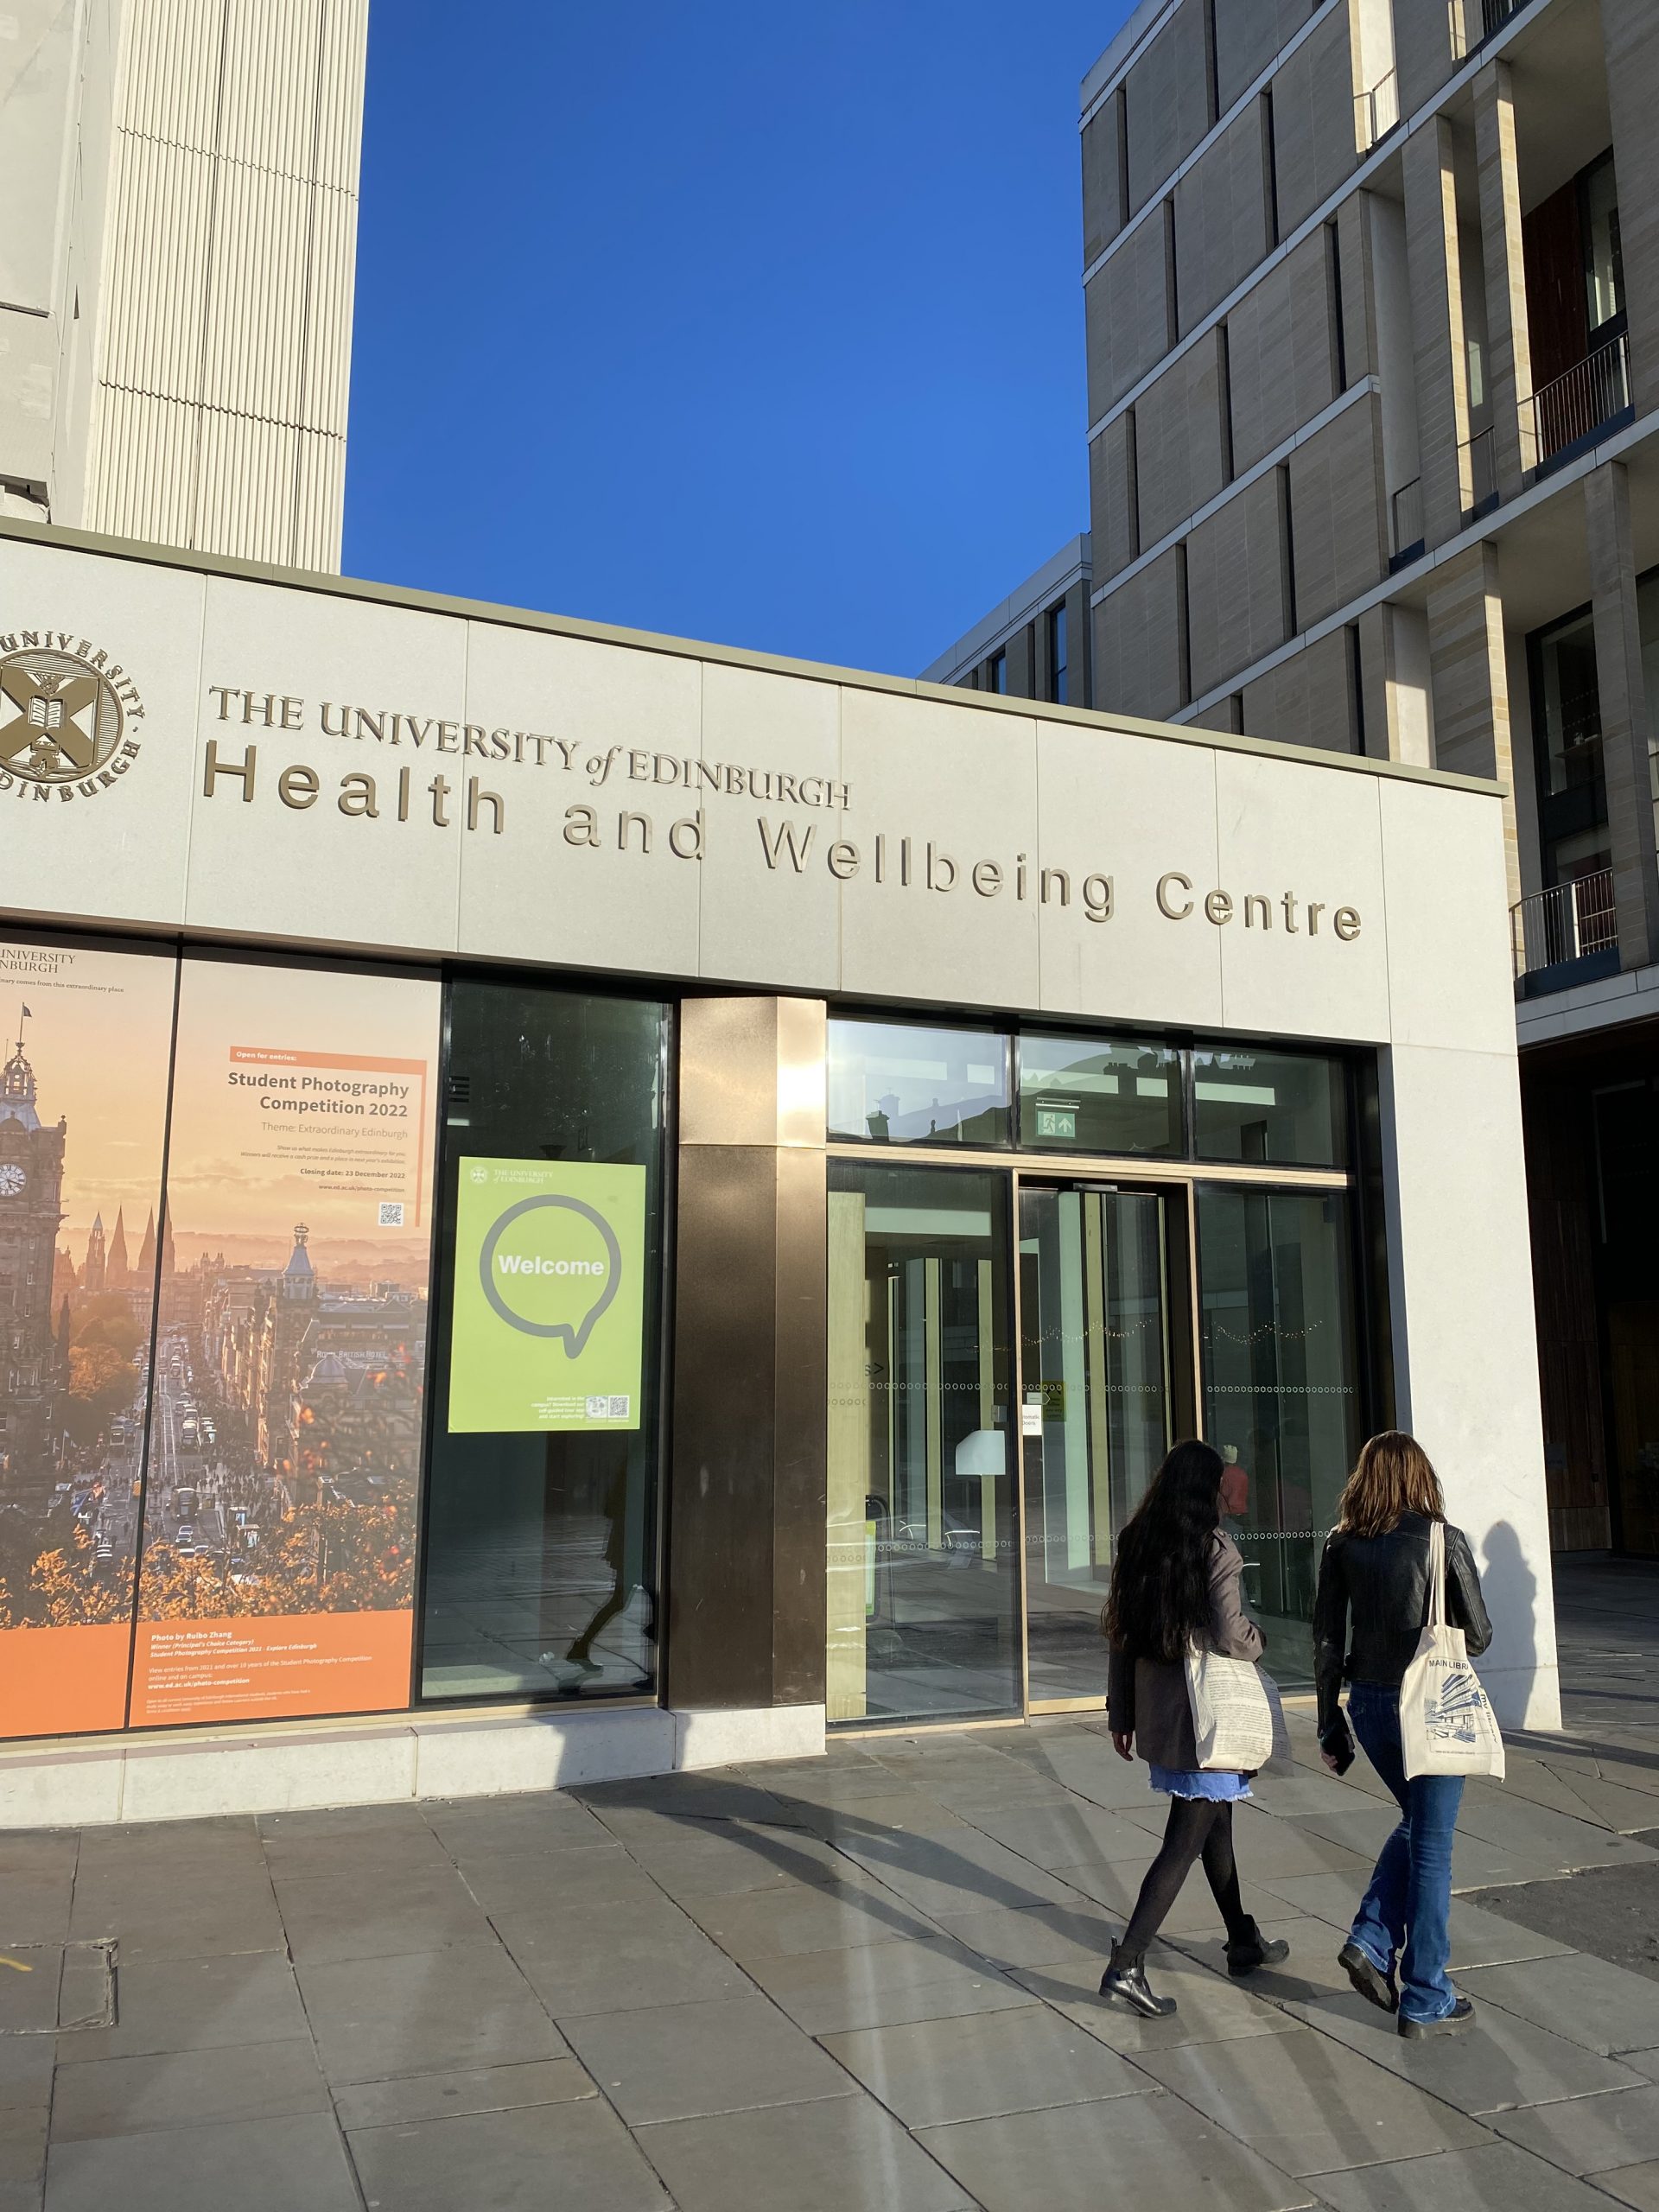 an image of the University of Edinburgh's Health and Well-Being Centre